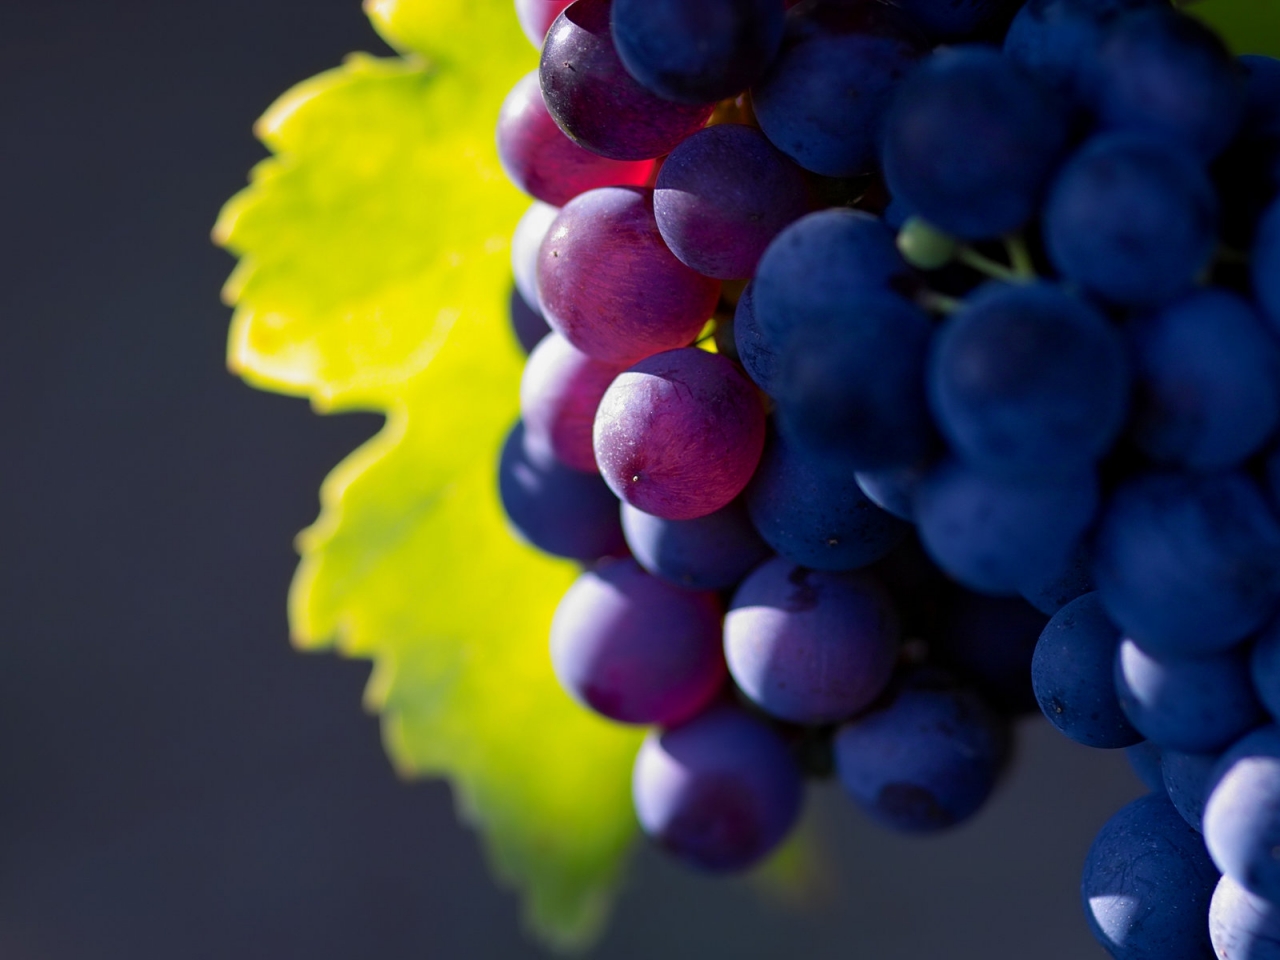 Bunch of Grapes for 1280 x 960 resolution